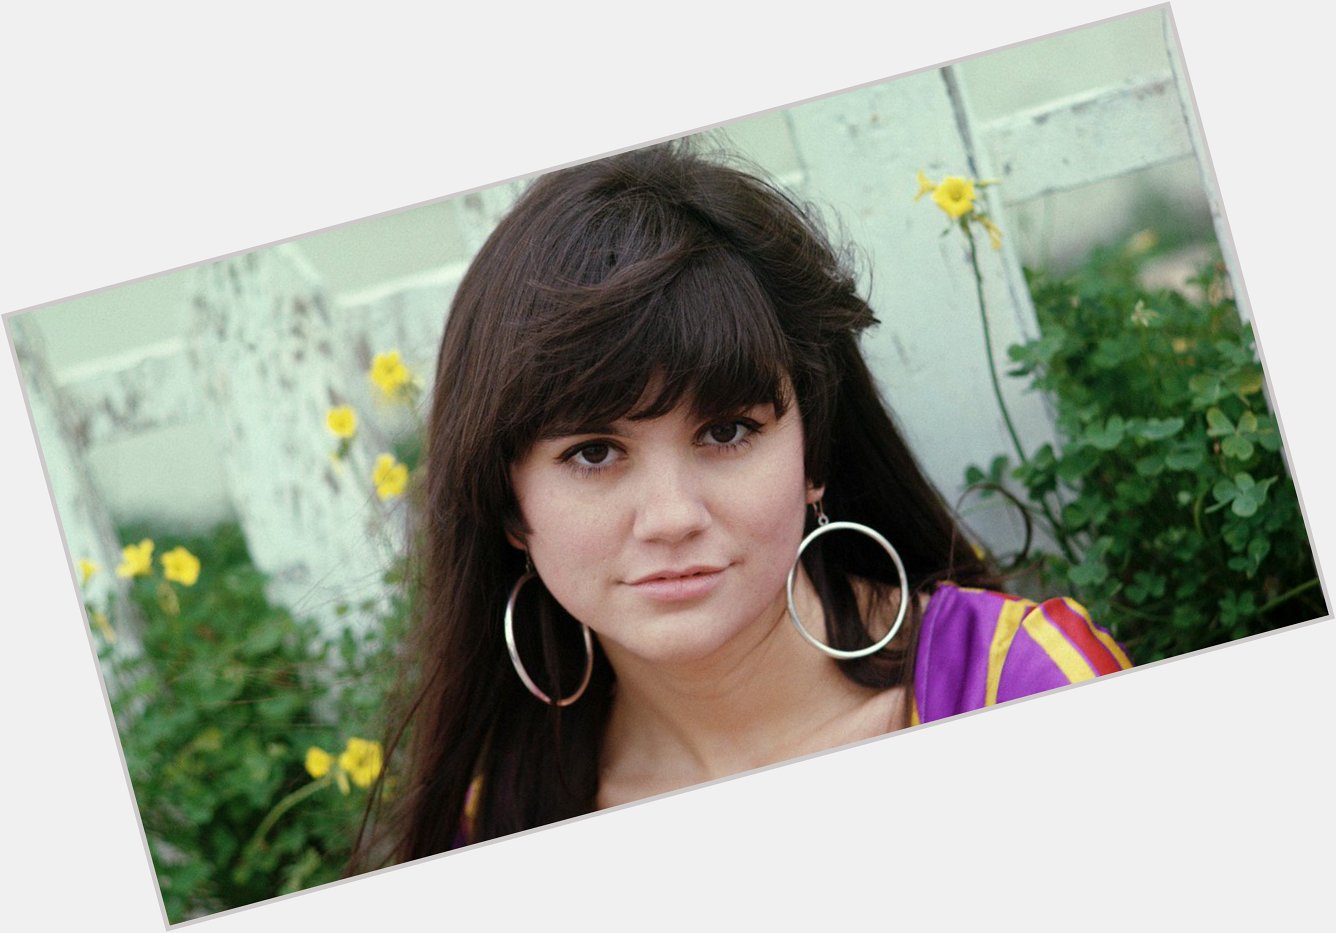 Happy 73rd birthday today to the one & only Linda Ronstadt! Born on July 15th, 1946. 